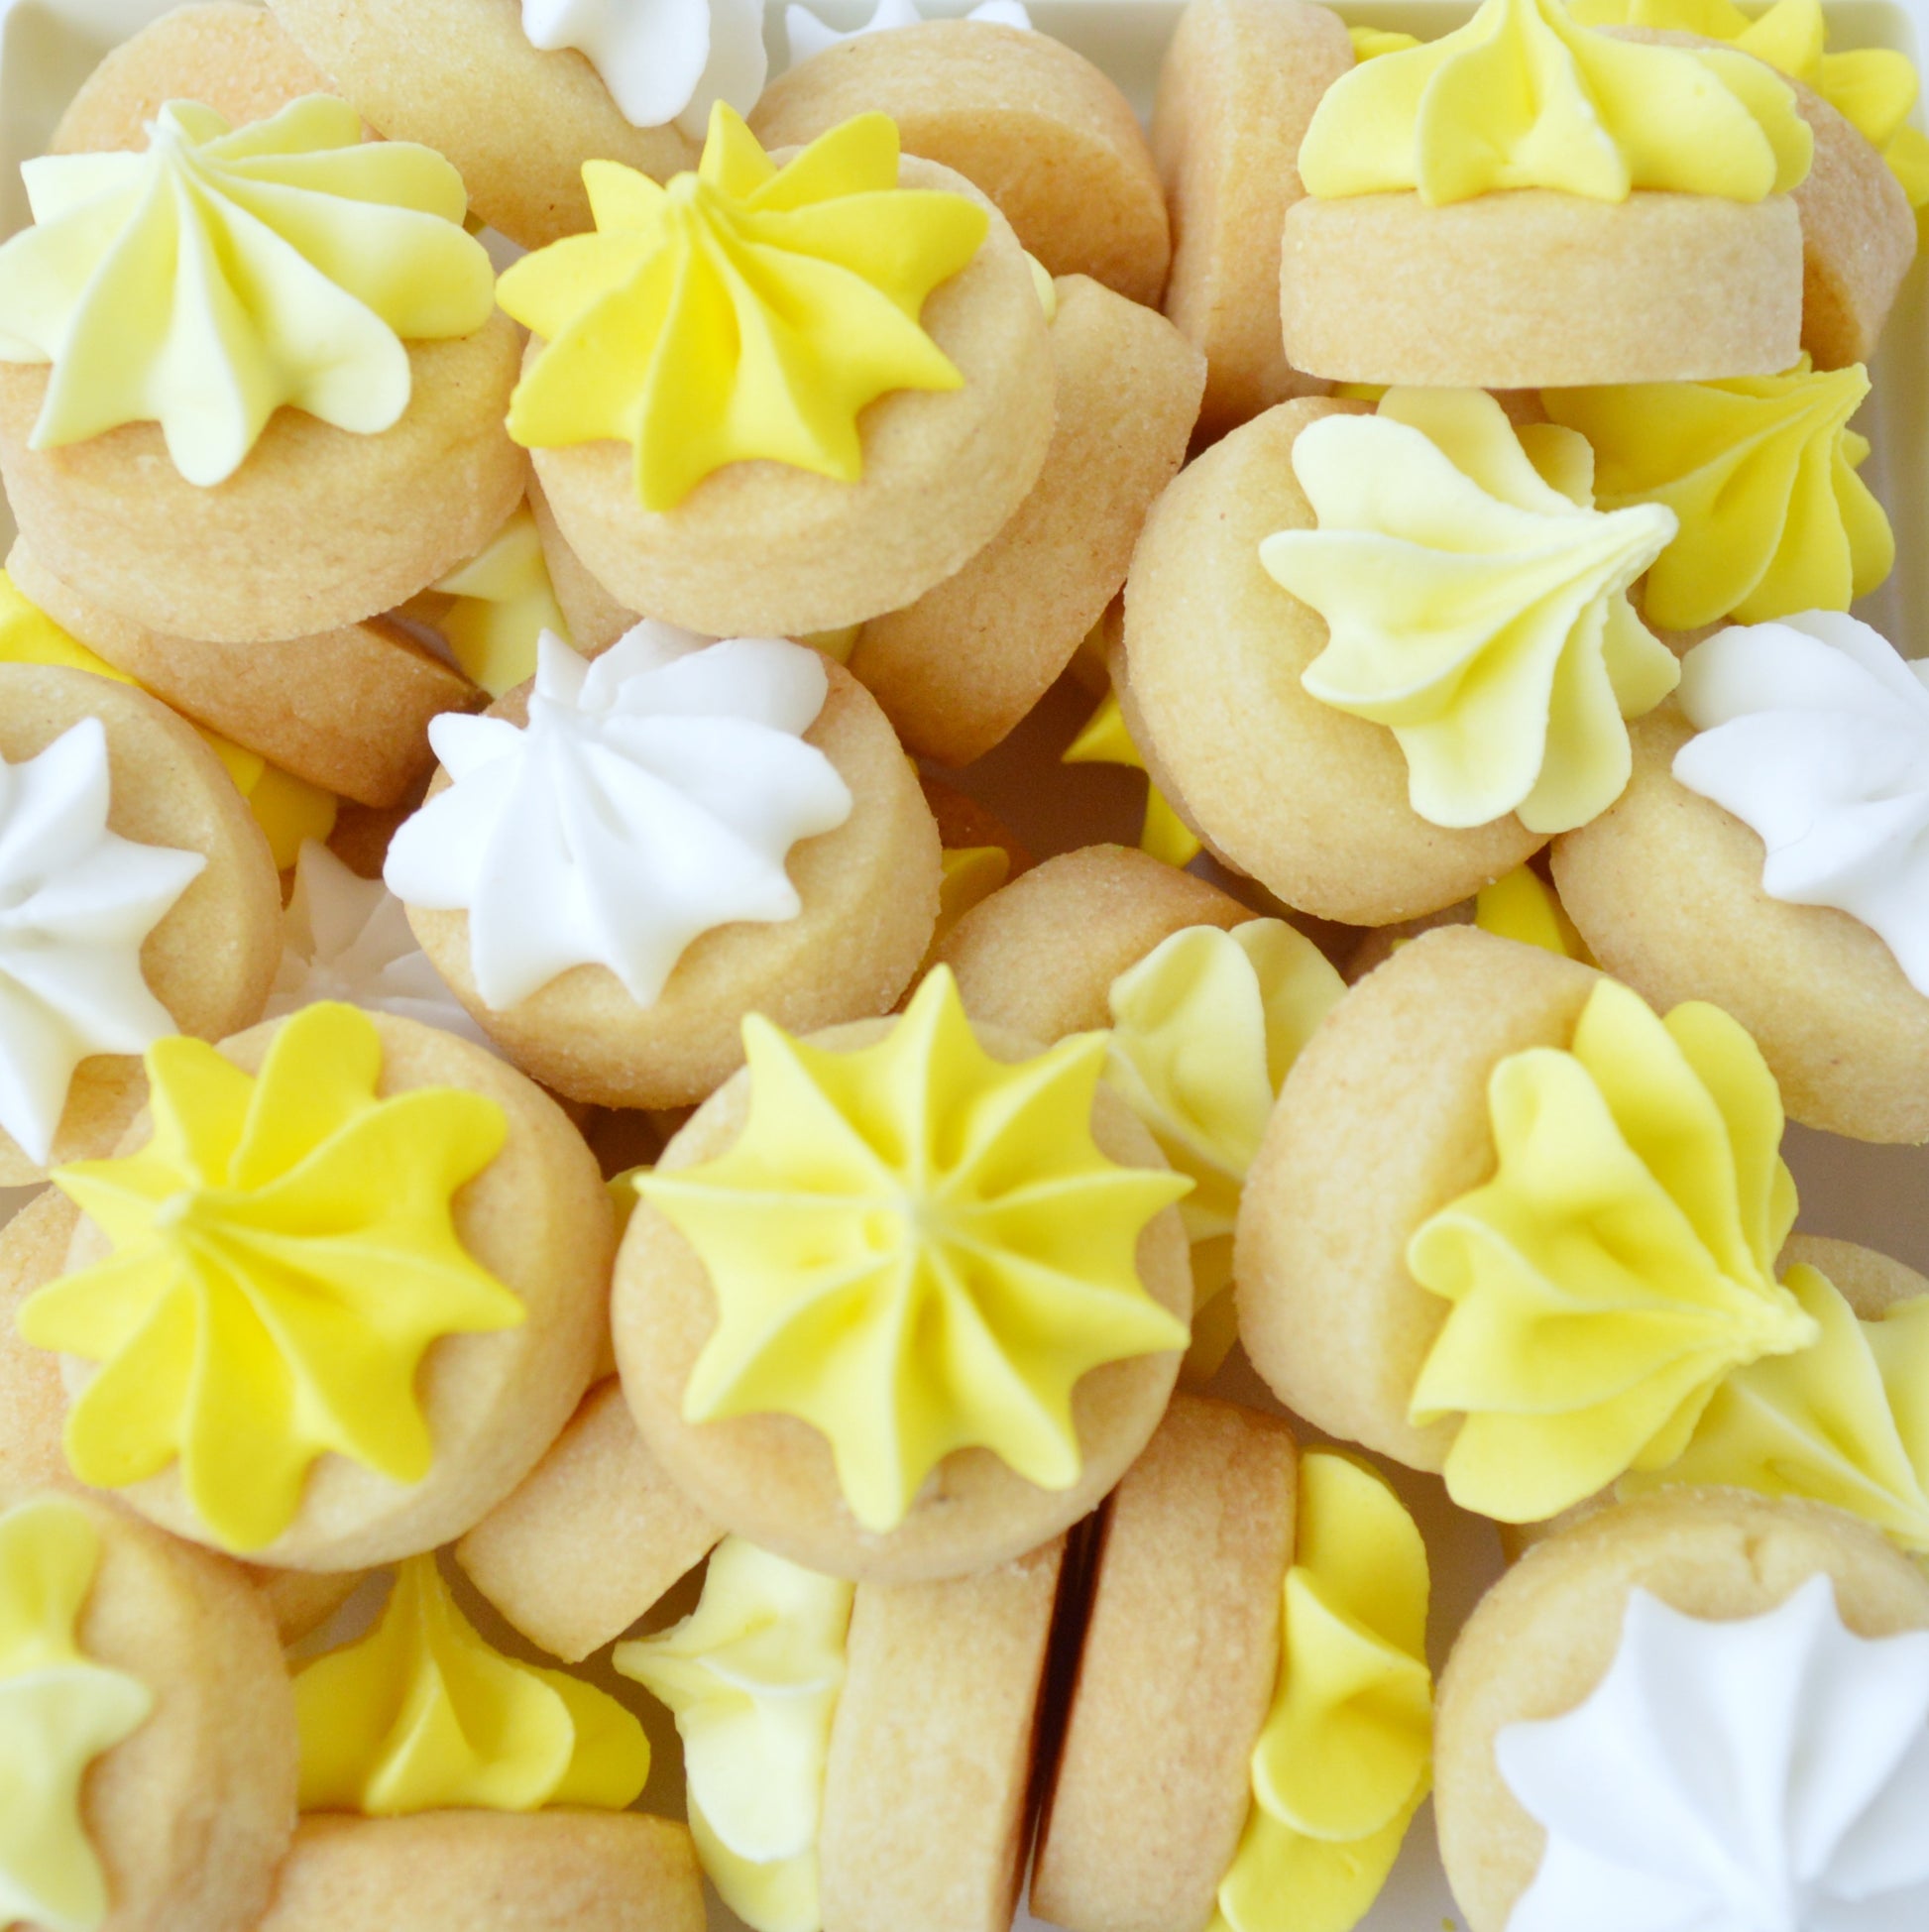 Biscuit iced gems in shades of yellow by Katie's Biscuit shop